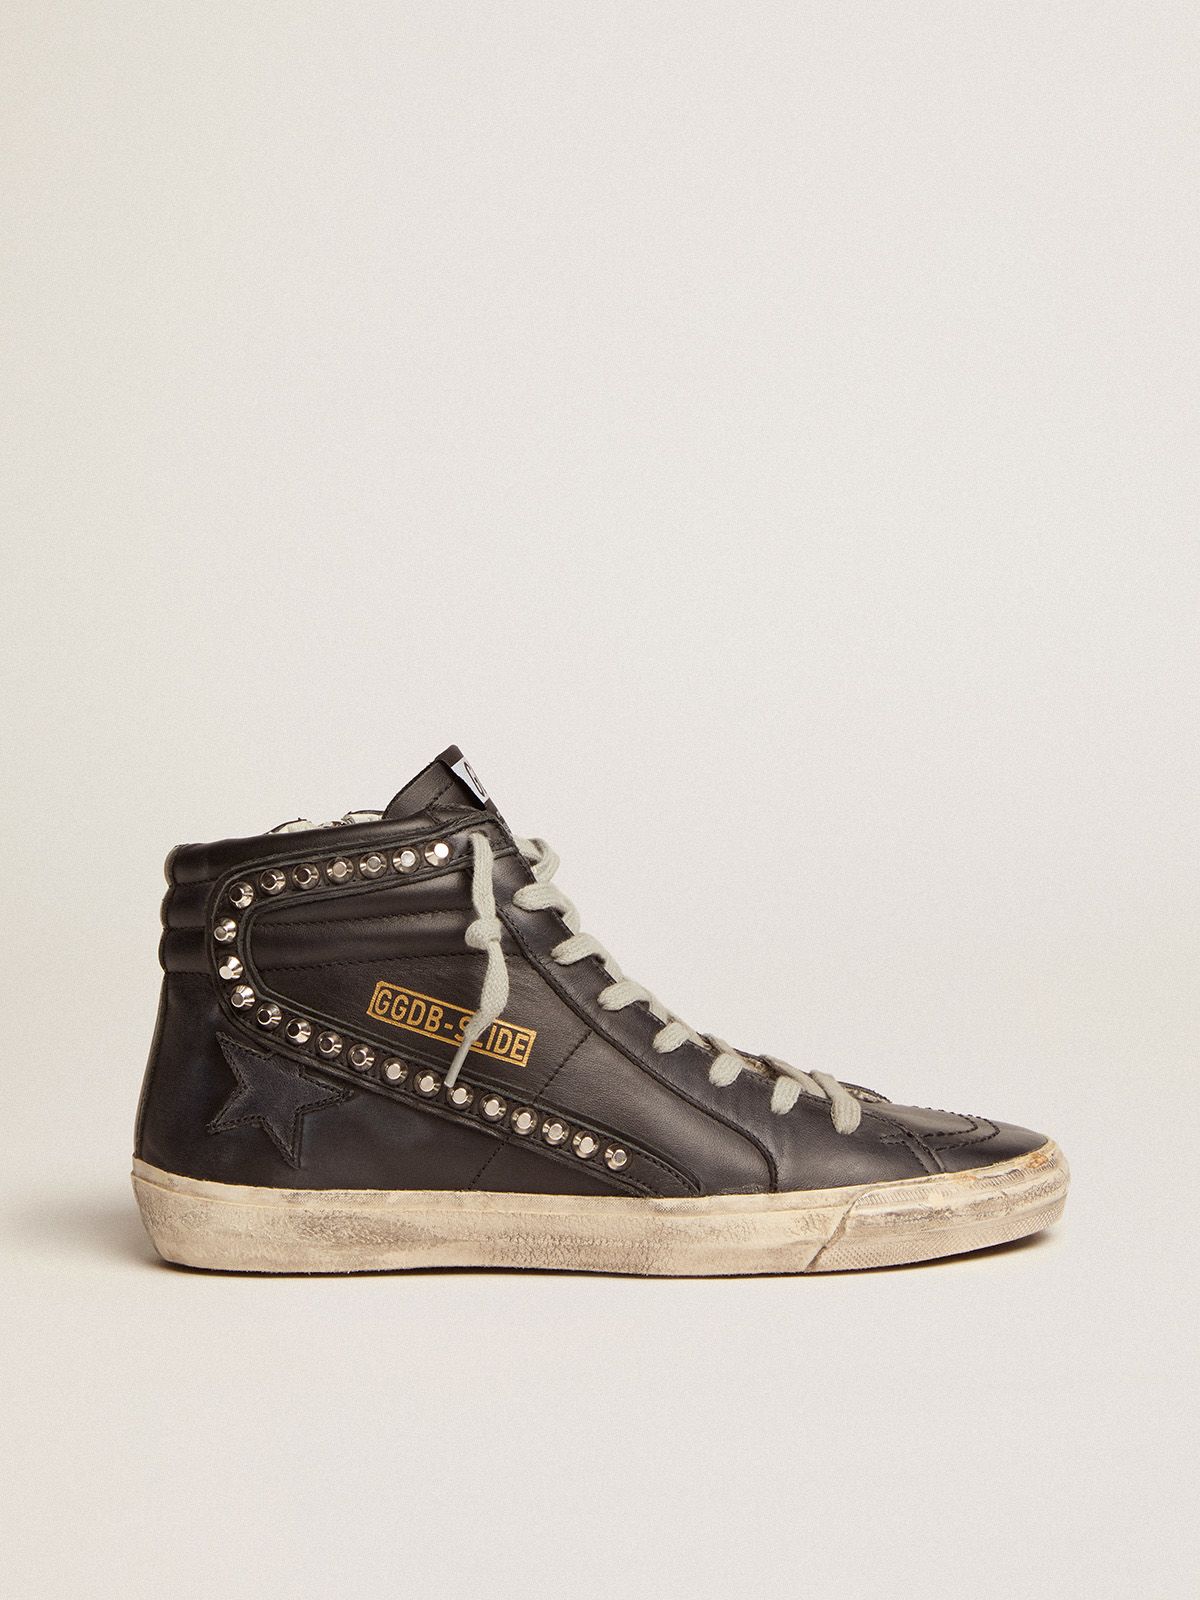 golden goose metal Slide in studded sneakers leather